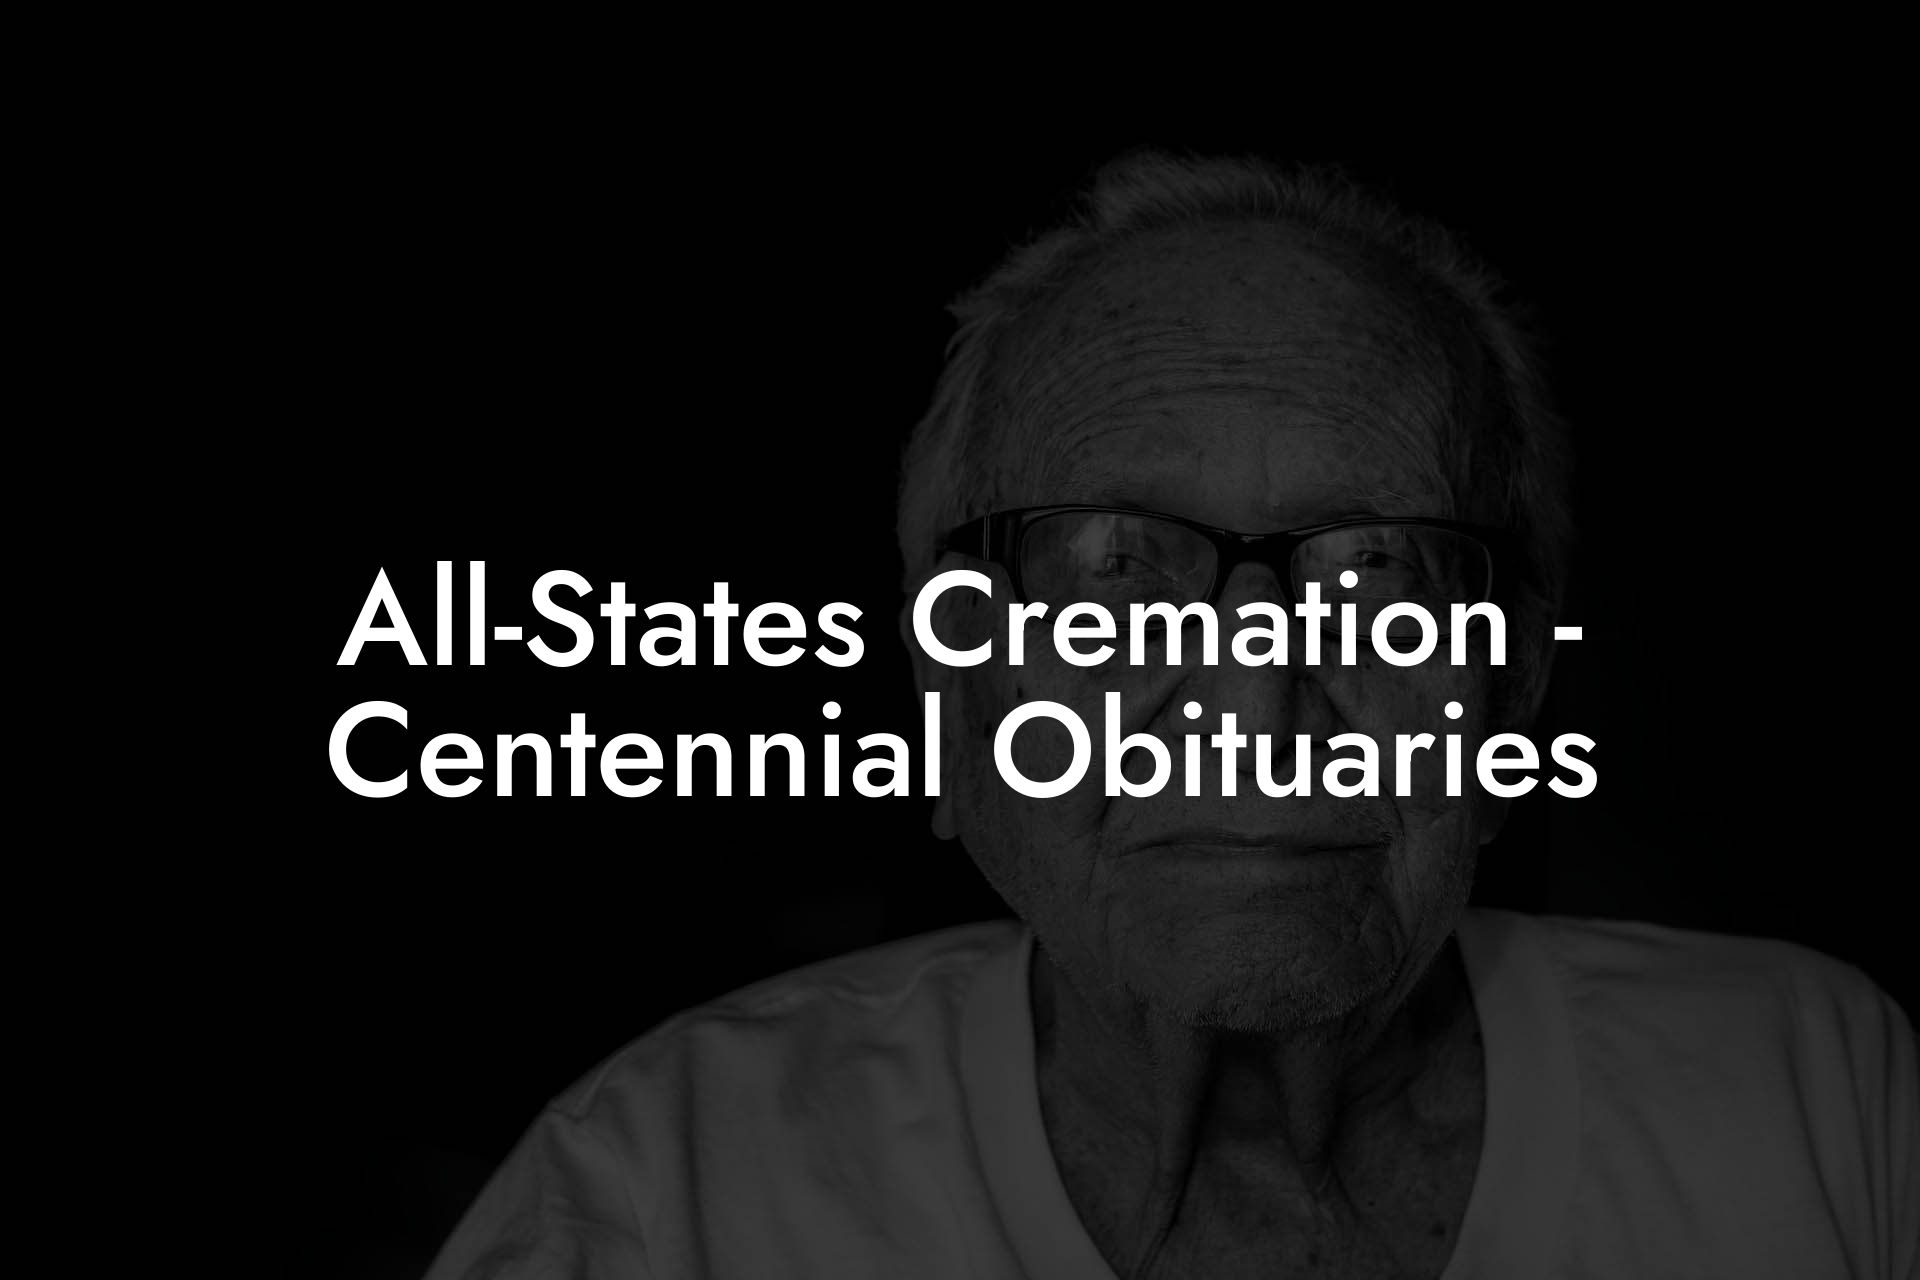 All-States Cremation - Centennial Obituaries